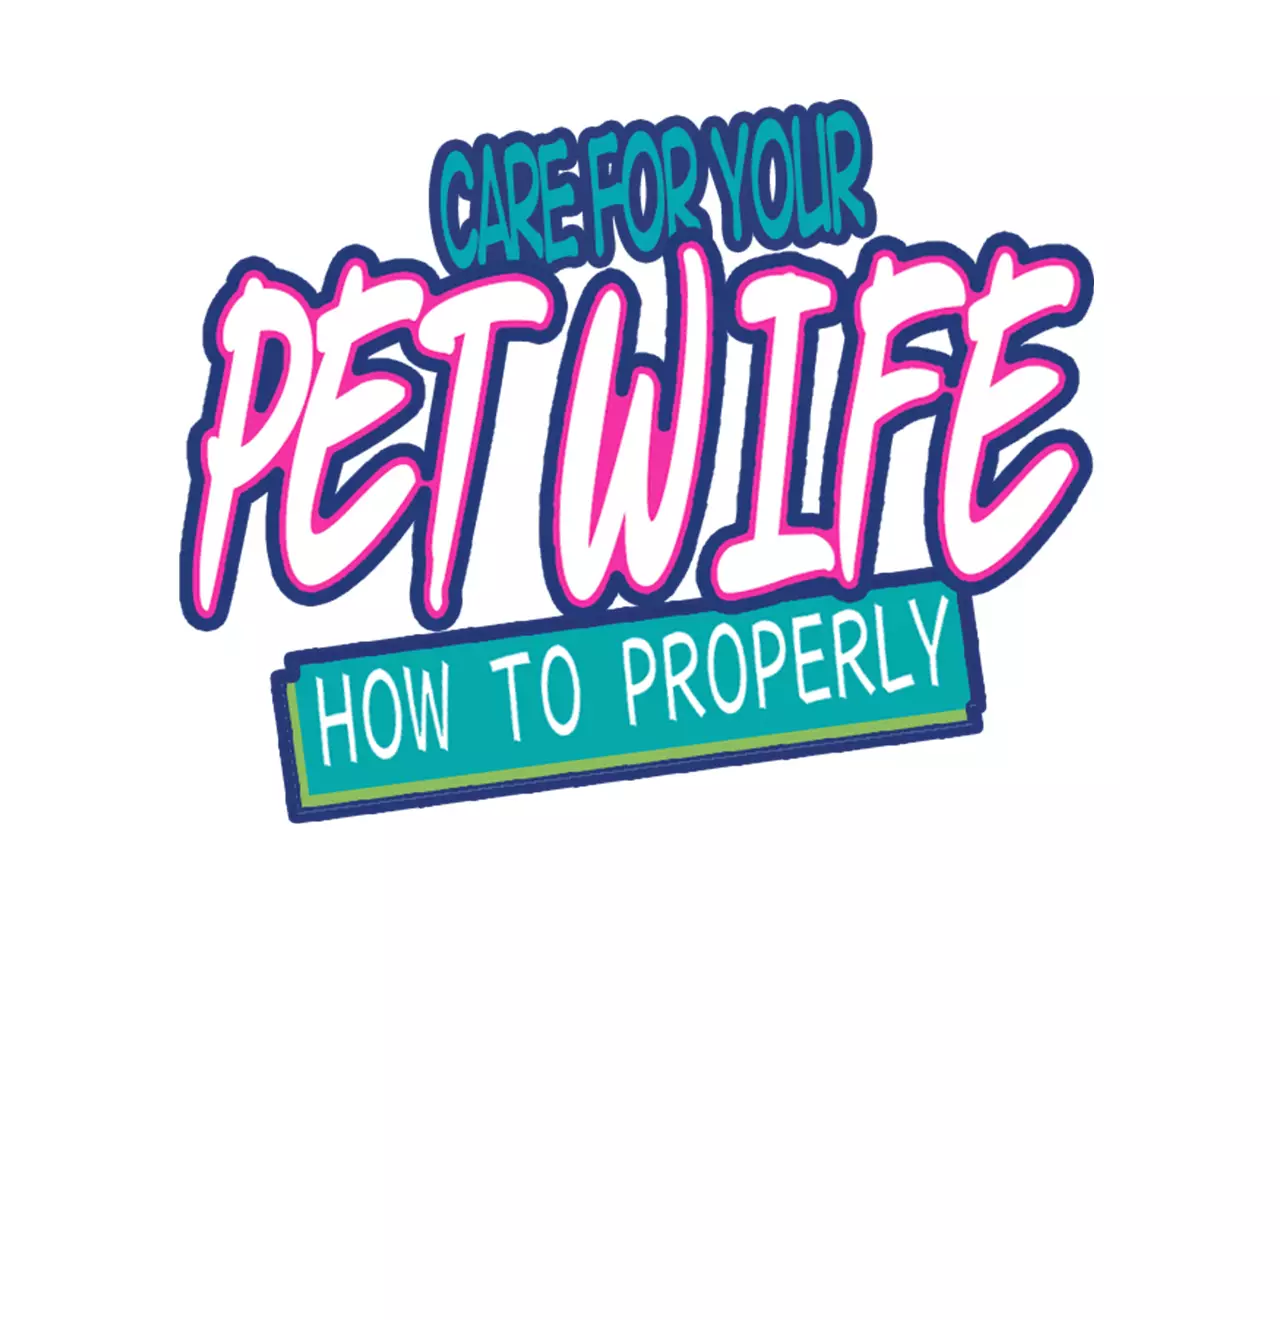 How To Properly Care For Your Pet Wife - 34.1 page 1